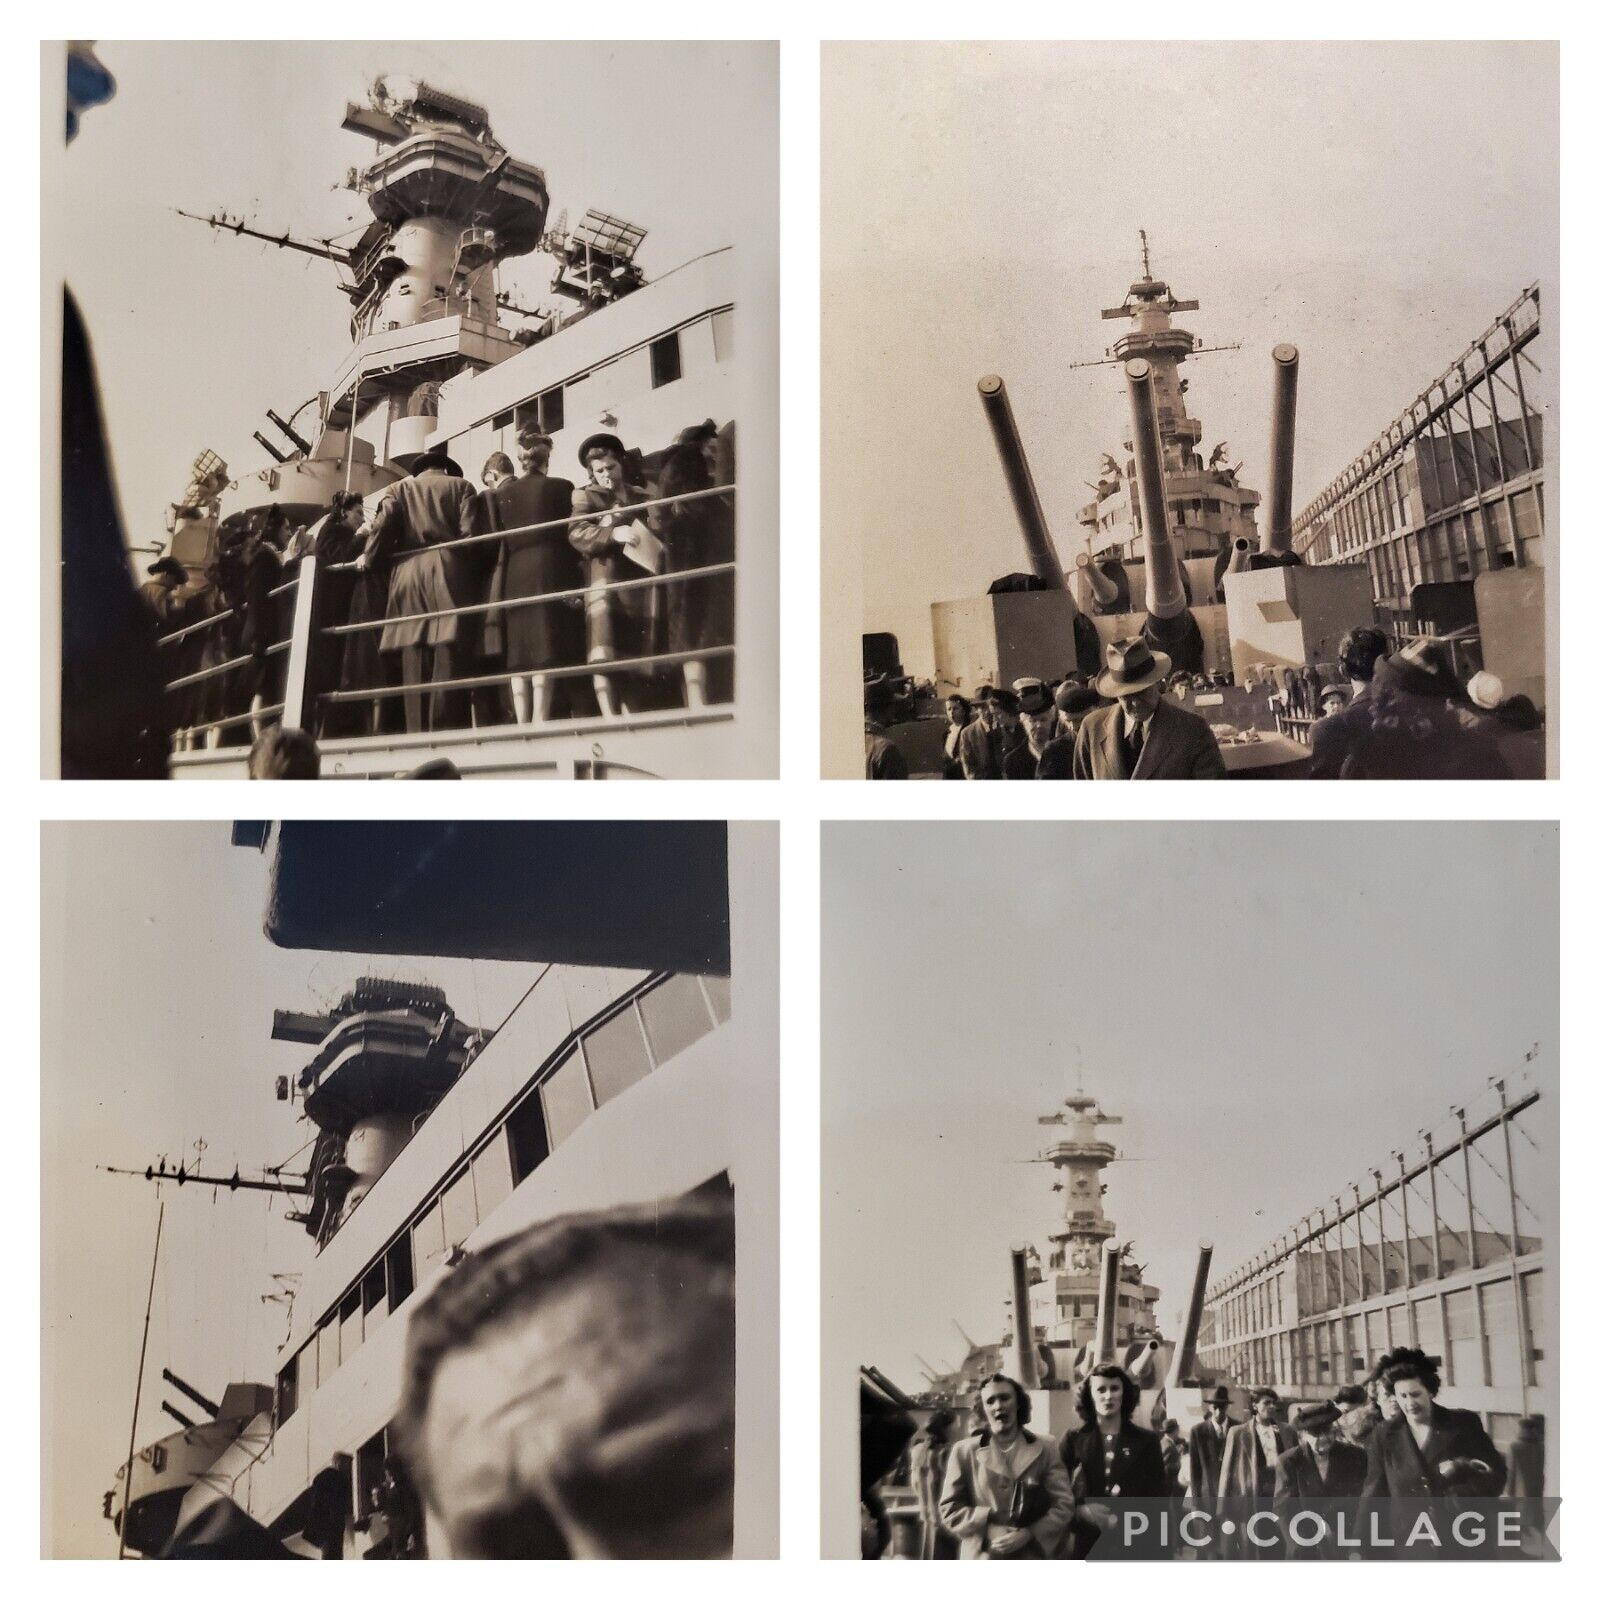 4 Vintage Photos of People Touring the U.S.S. MISSOURI Battleship during WWII